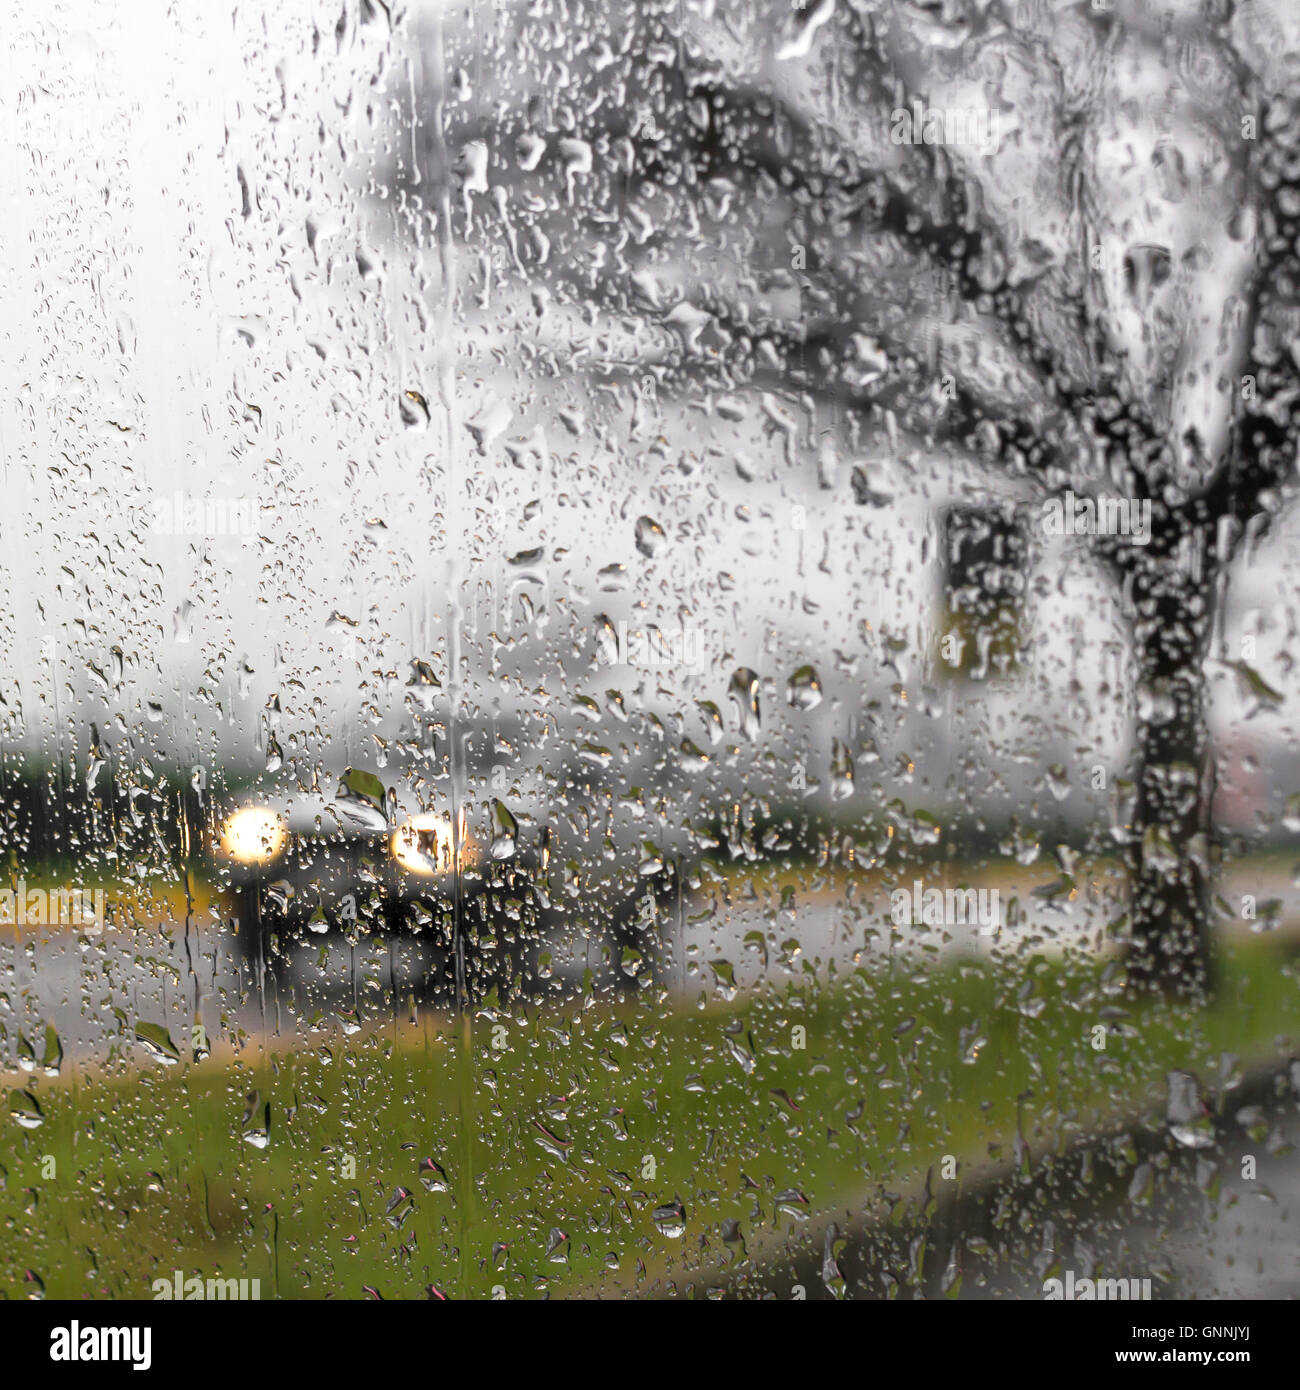 Rain on the car glass, wet day, shot through a windscreen, focusing on the rain droplets. Stock Photo